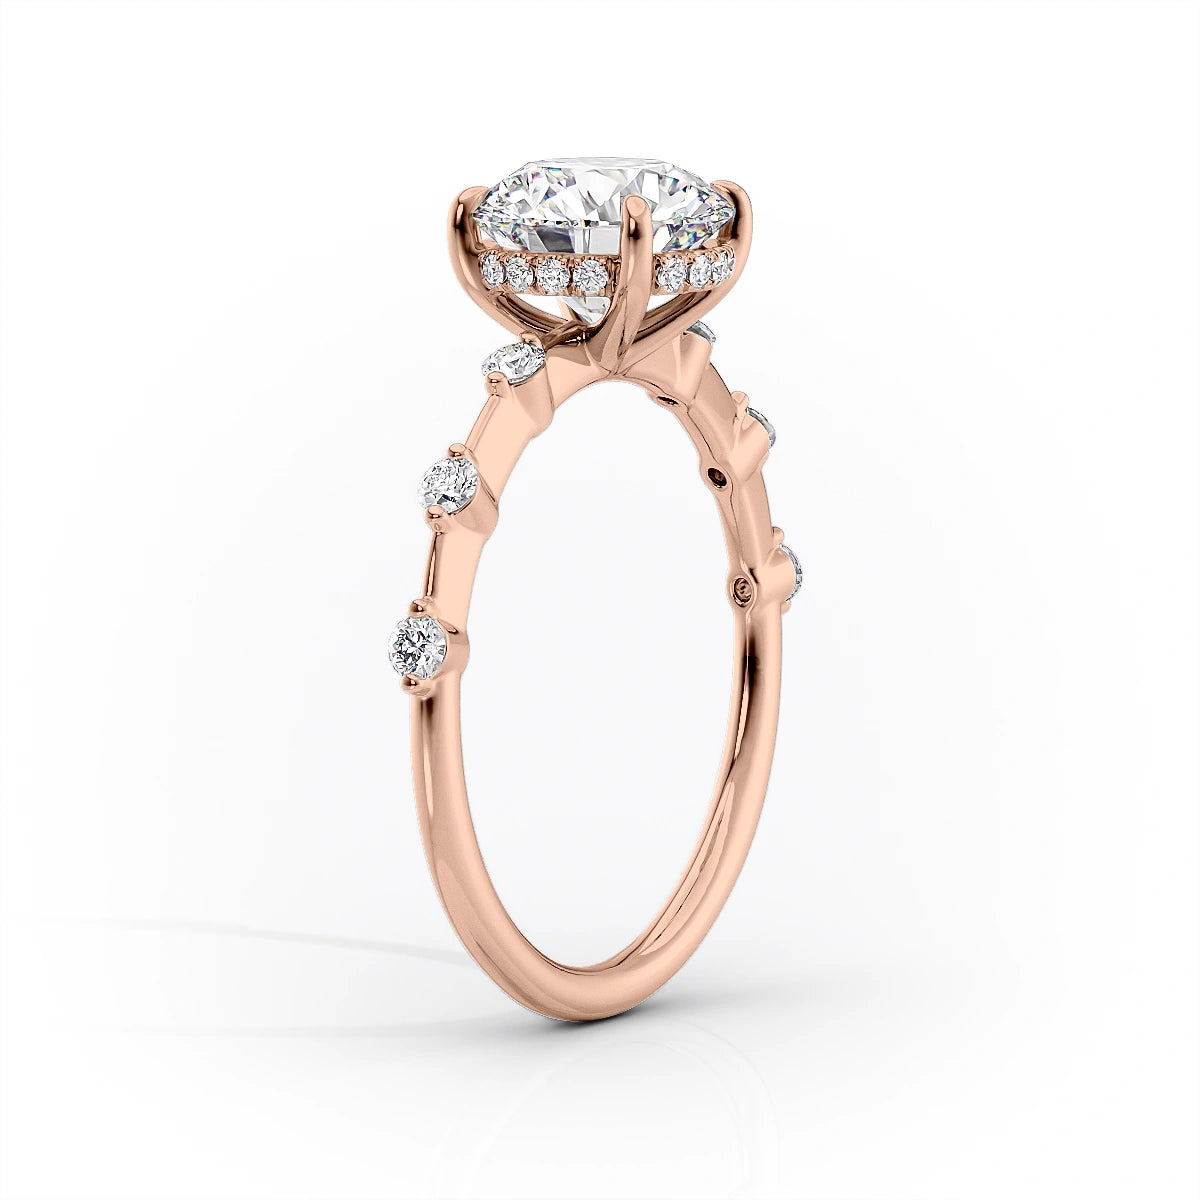 Buy 2.25 Ct Oval Engagement Ring. Rose Gold Engagement Ring. Fine Quality  Ring. Rose Gold Wedding Ring. Promise Ring. Rose Gold Solitaire Ring.  Online in India - Etsy